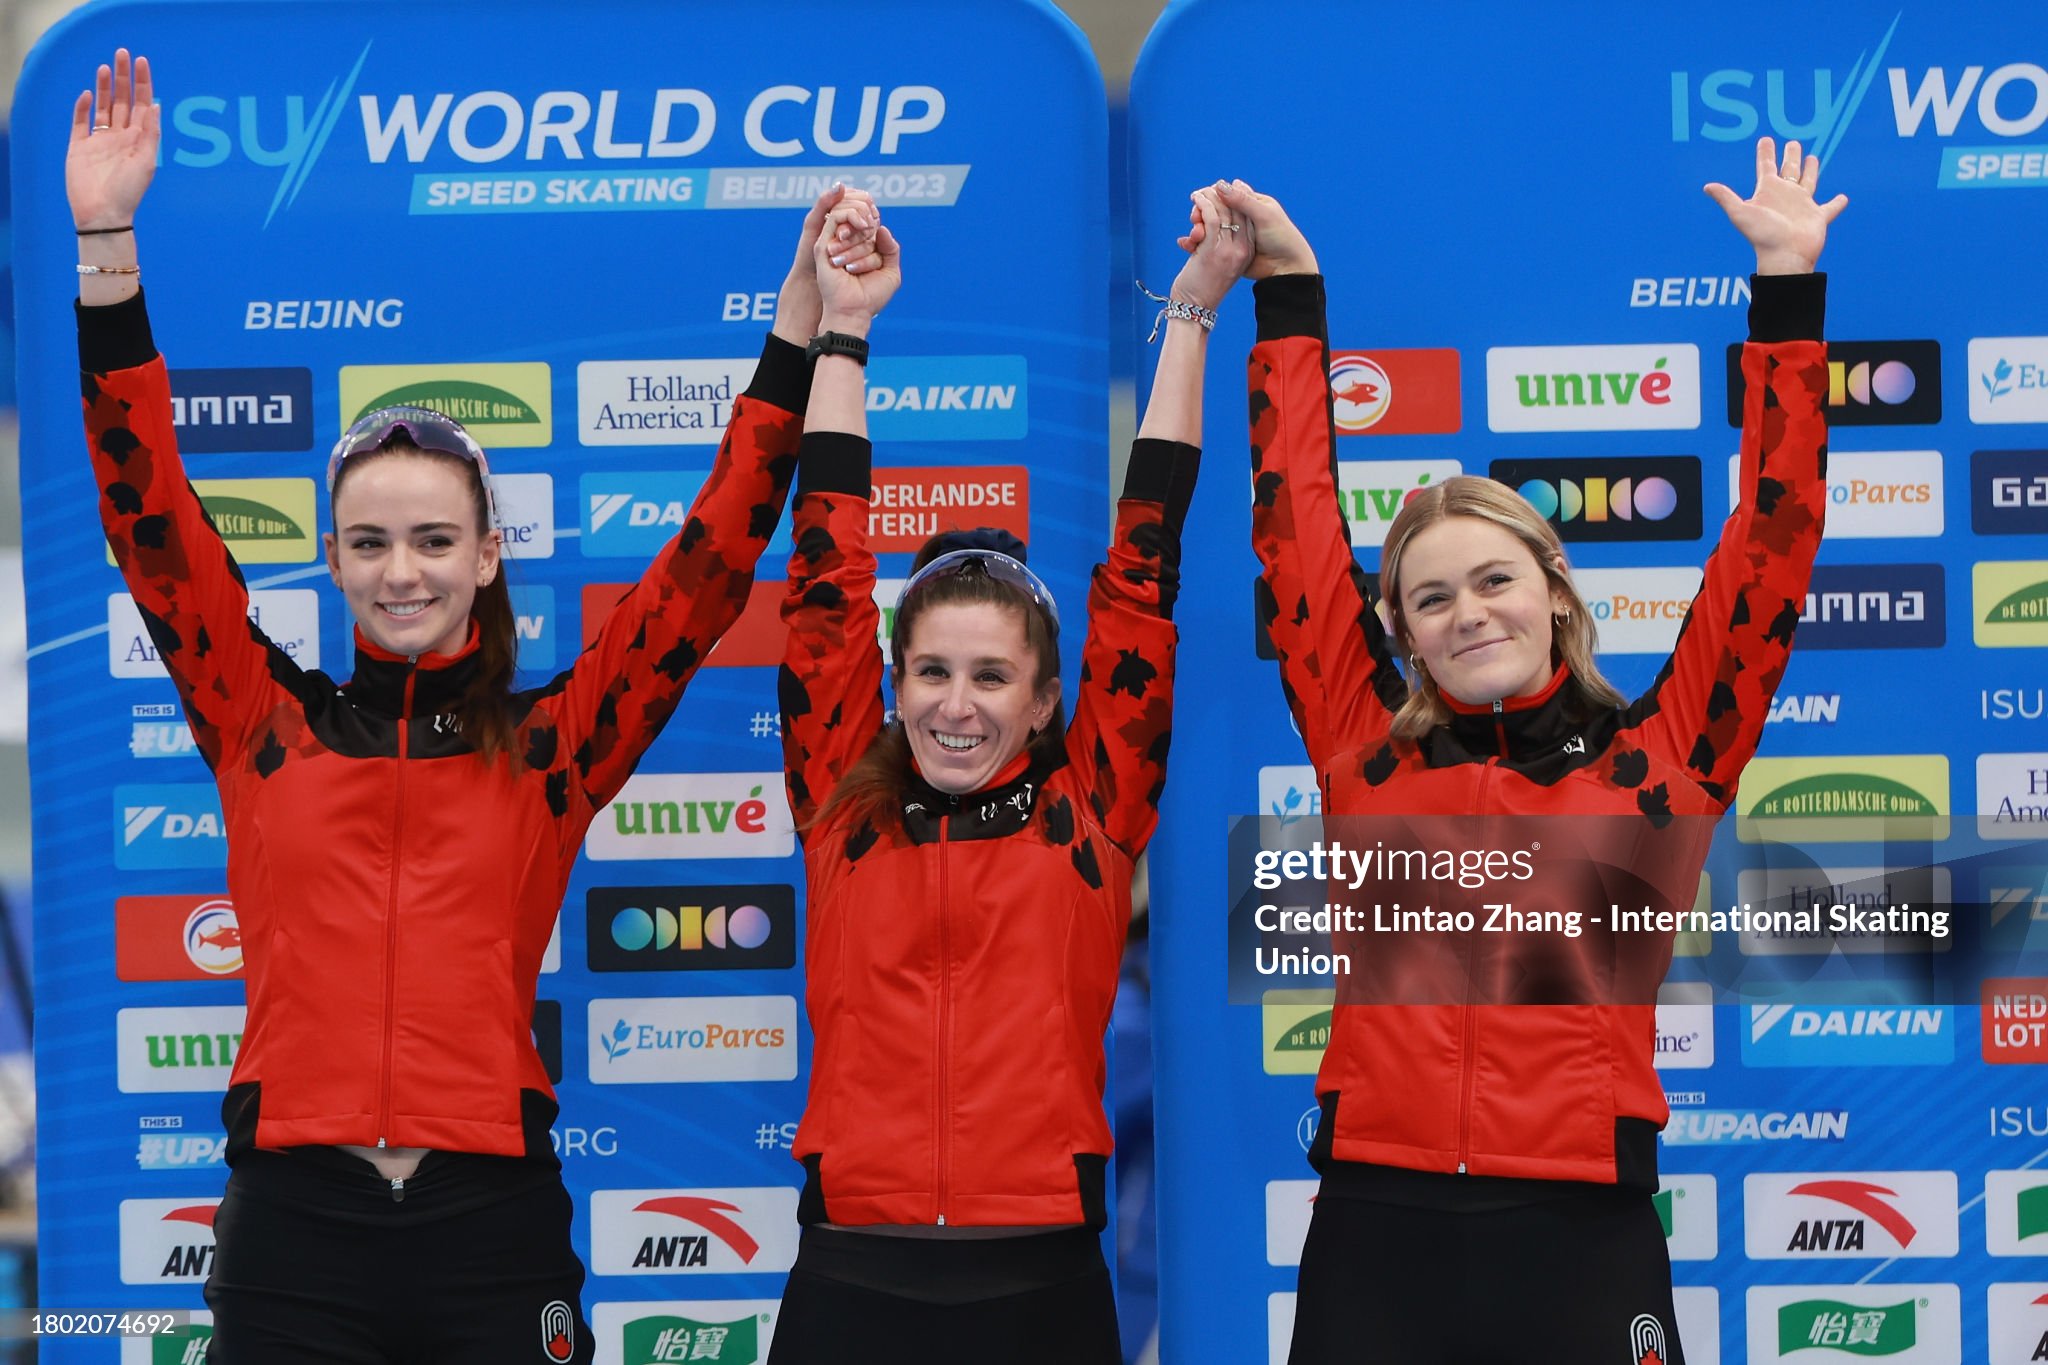 Canada wraps up World Cup in Beijing with silver medal in the women’s Team Sprint